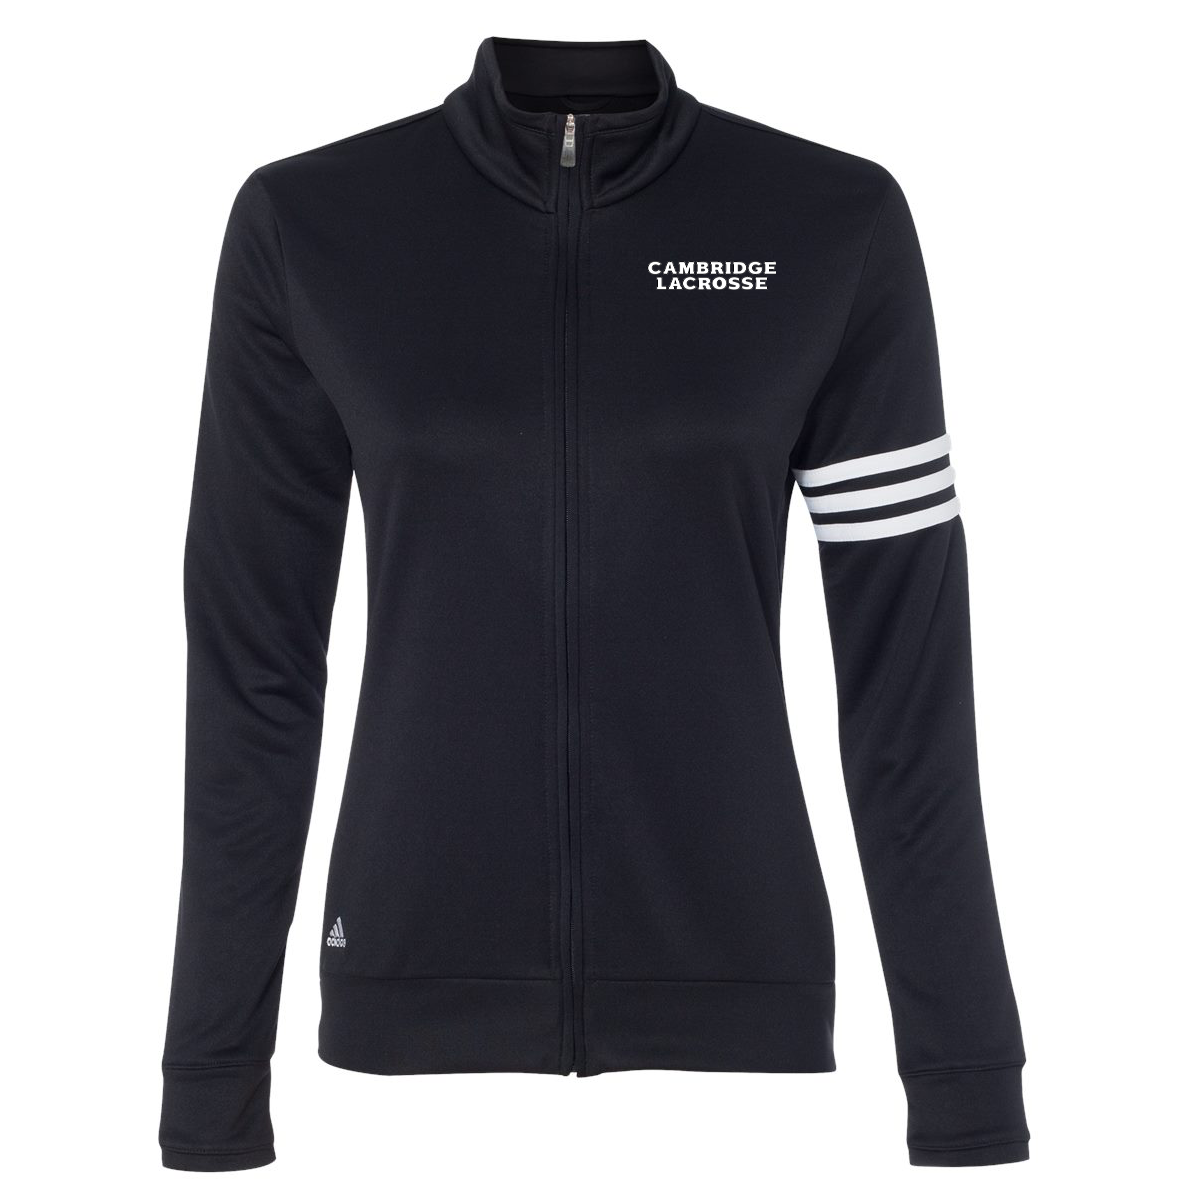 Cambridge Youth Lacrosse Adidas Women's 3-Stripes French Terry Full-Zip Jacket